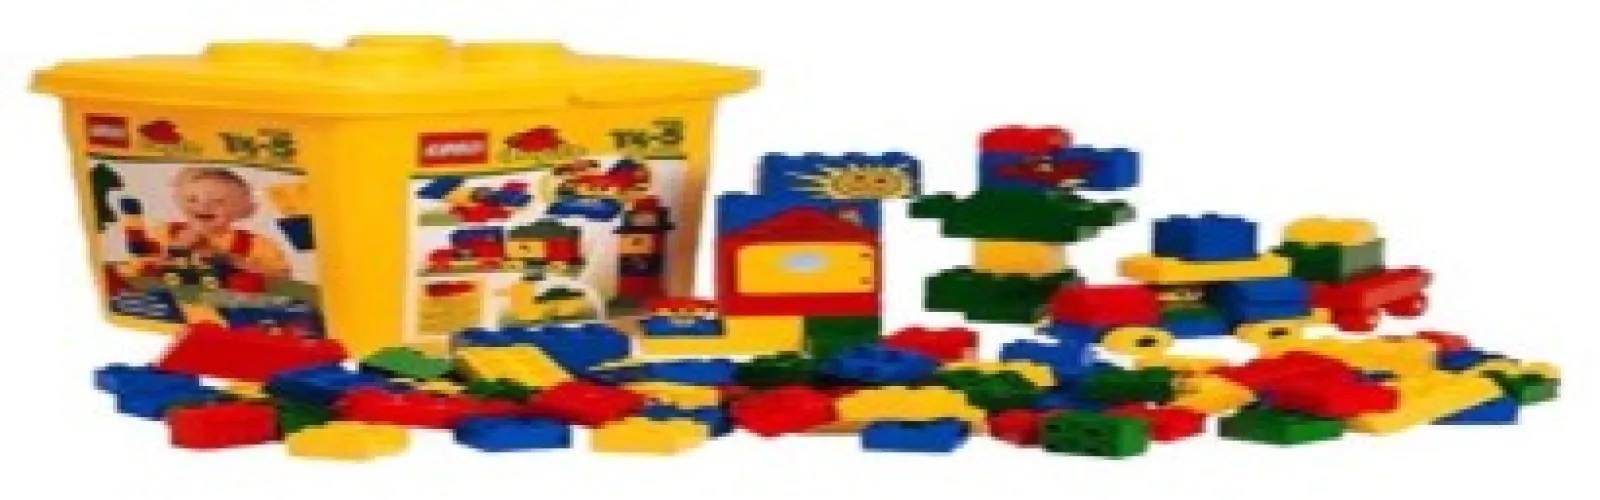 A yellow Lego duplo blocks bucket surrounded by different colored duplo blocks.